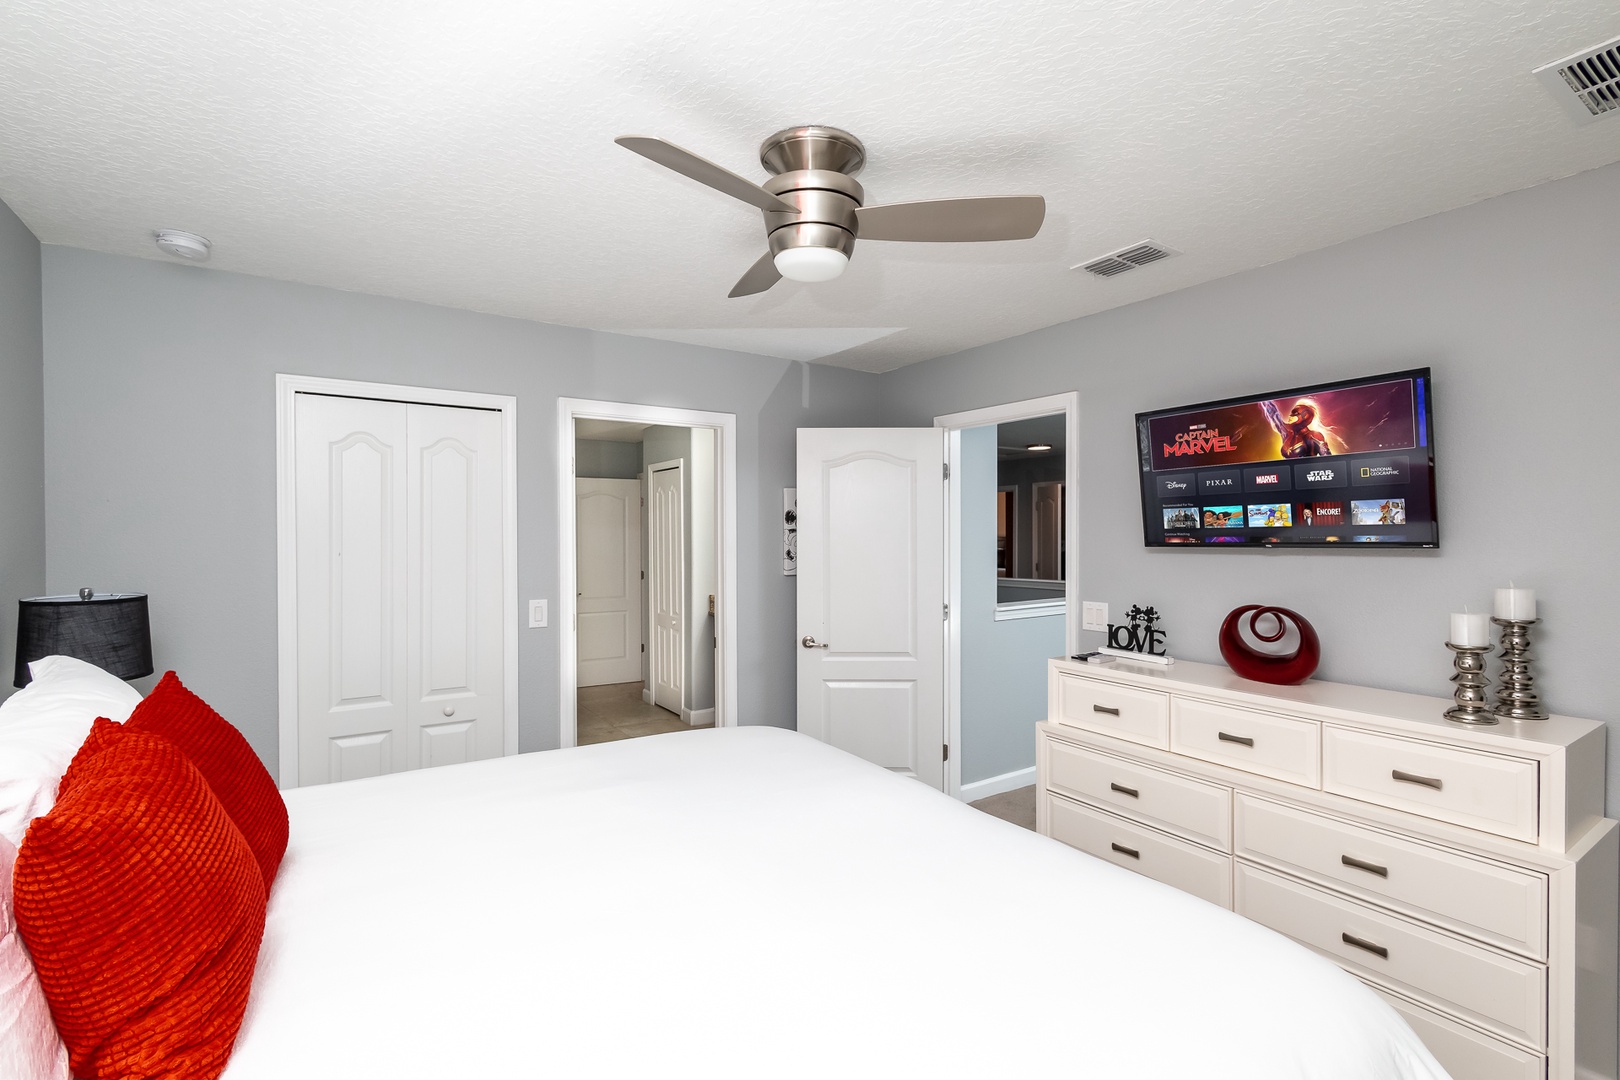 Bedroom 3 Mickey Mouse themed with king bed, Smart TV, and shared ensuite